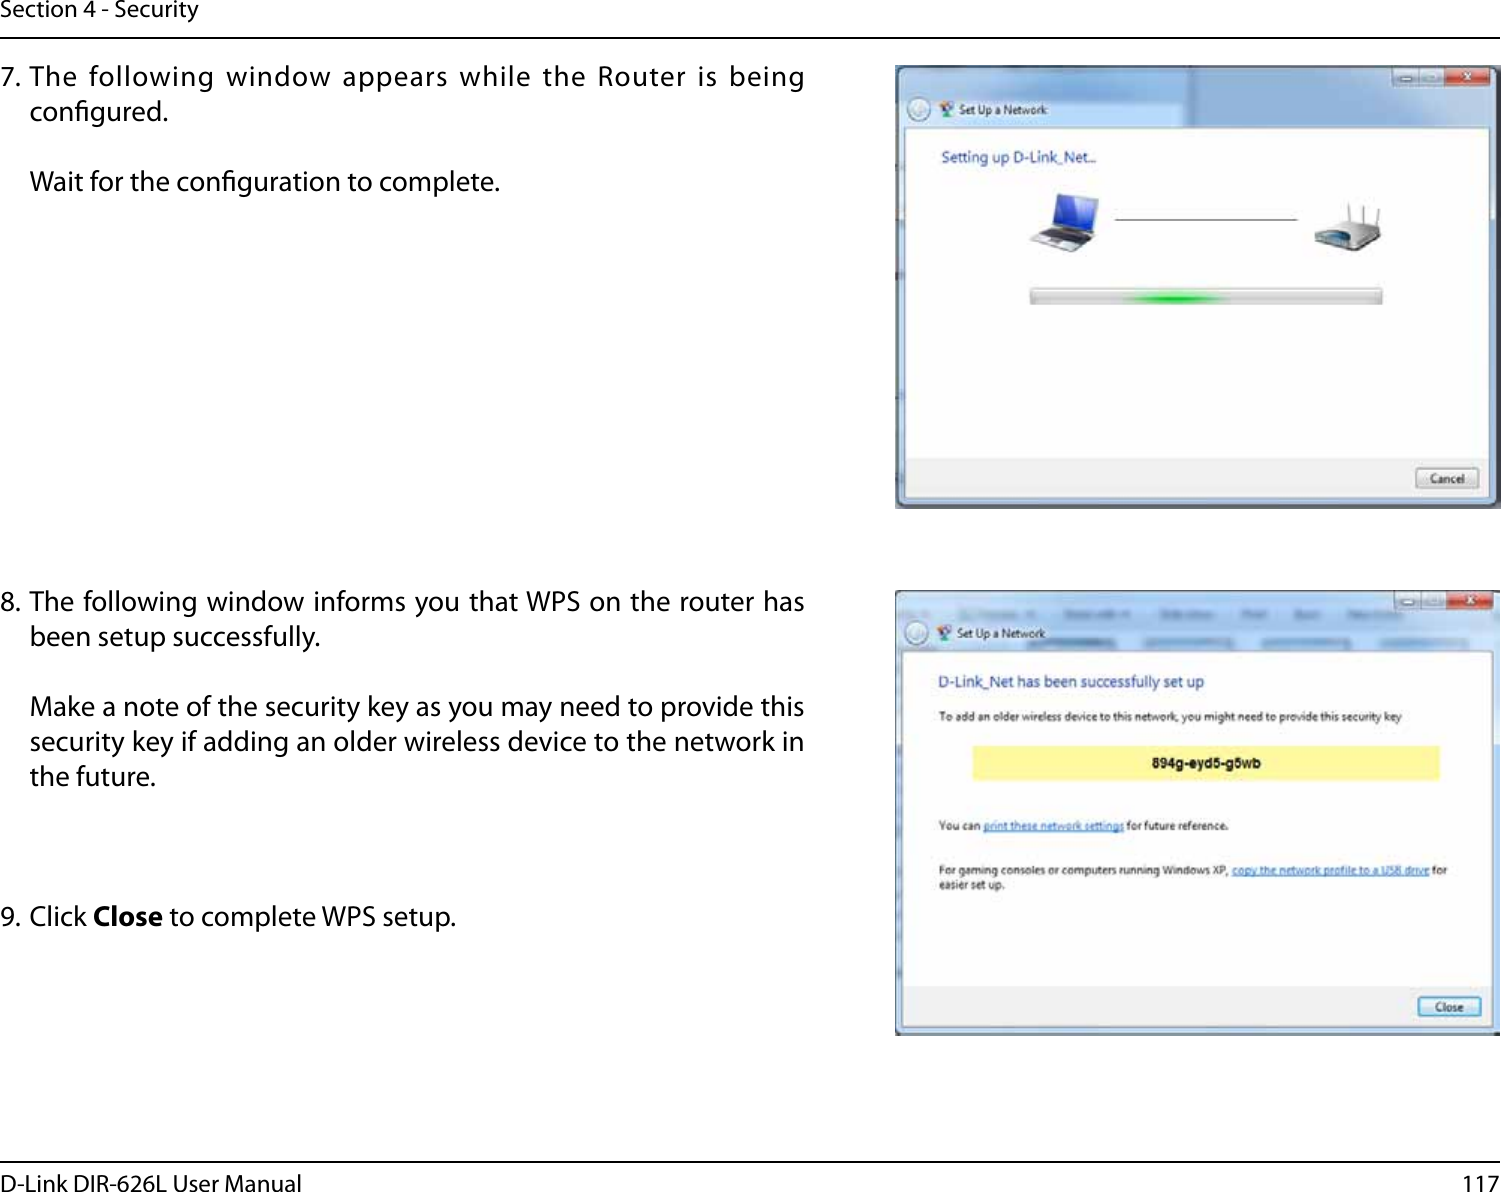 117D-Link DIR-626L User ManualSection 4 - Security7. The following window appears while the Router is being congured.   Wait for the conguration to complete.8. The following window informs you that WPS on the router has been setup successfully.  Make a note of the security key as you may need to provide this security key if adding an older wireless device to the network in the future.9. Click Close to complete WPS setup.